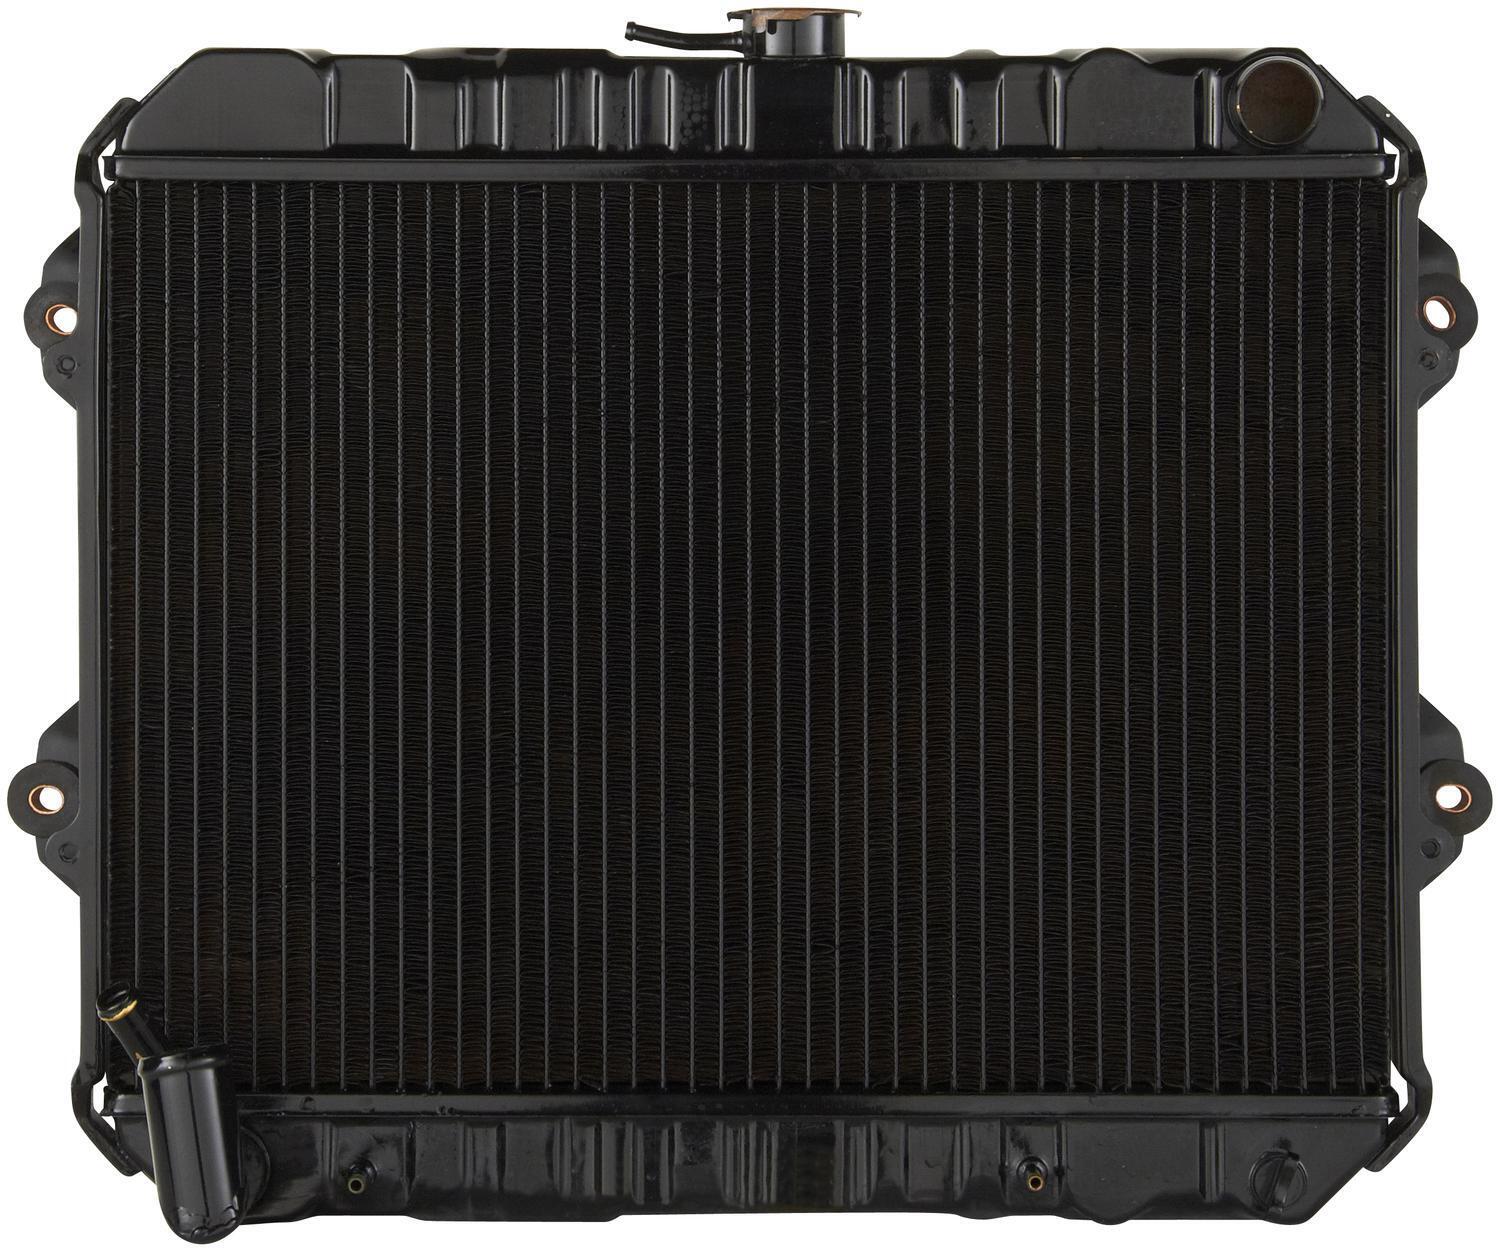 Radiator Fit for Toyota Pickup 1981-1983